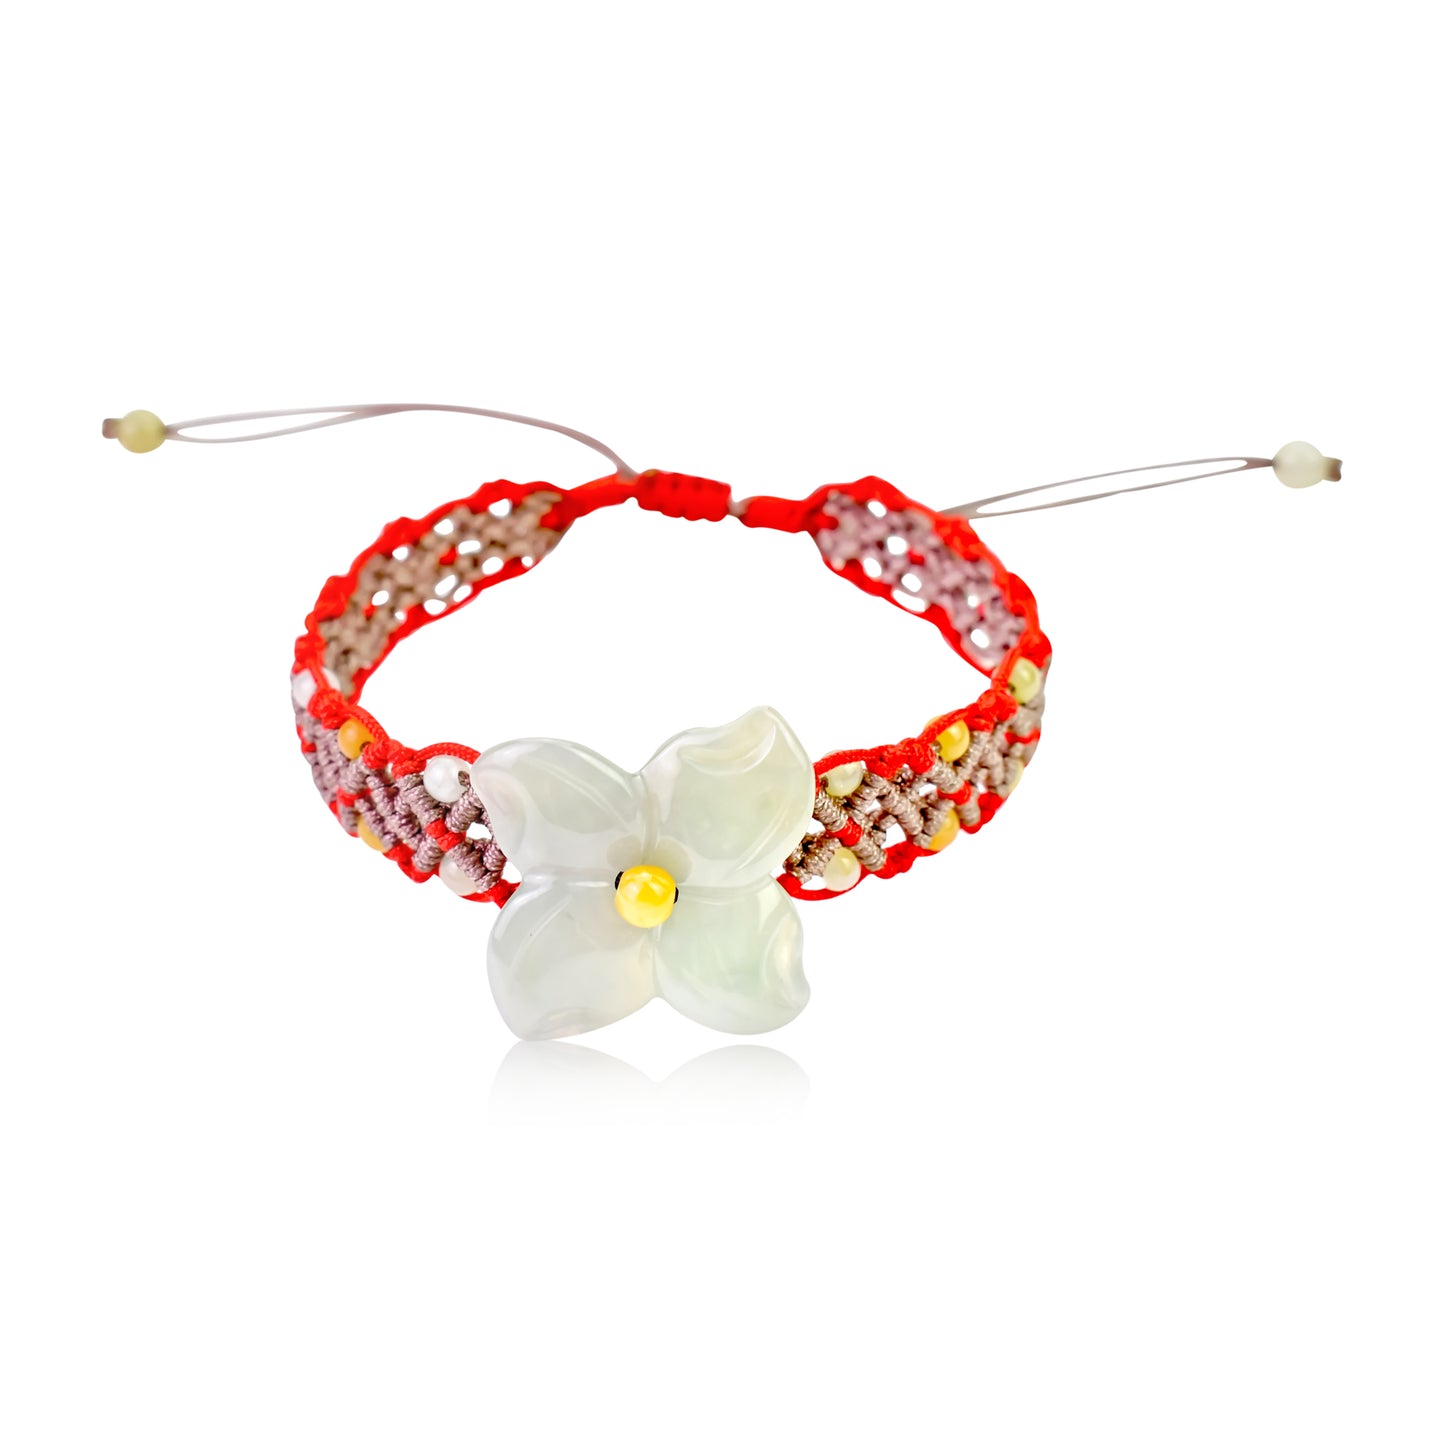 Look Gorgeous with the Peruvian Lily Flower Bracelet made with Red Cord